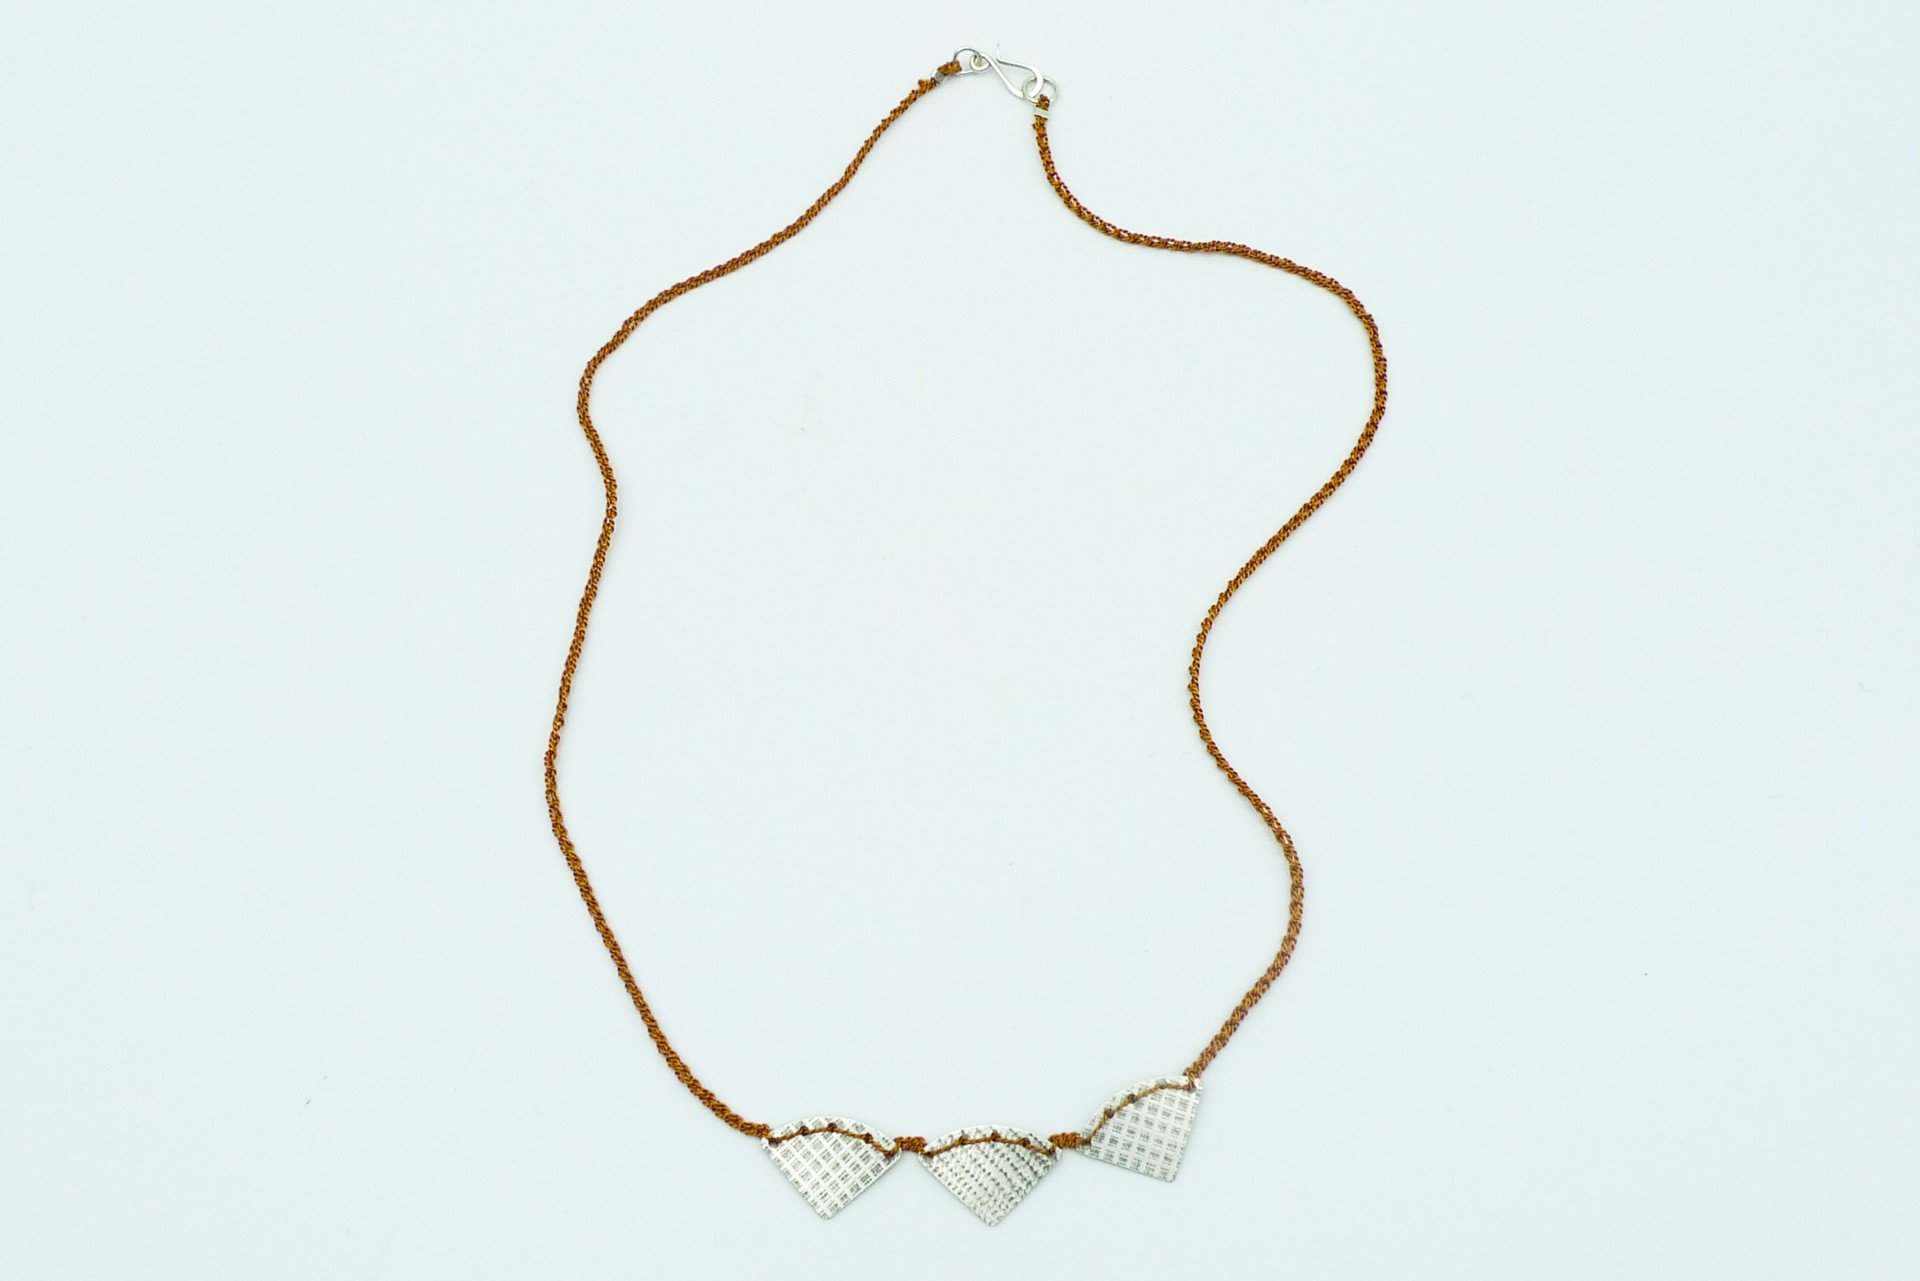 Necklace with Copper Colored Silk Thread by Erica Schlueter